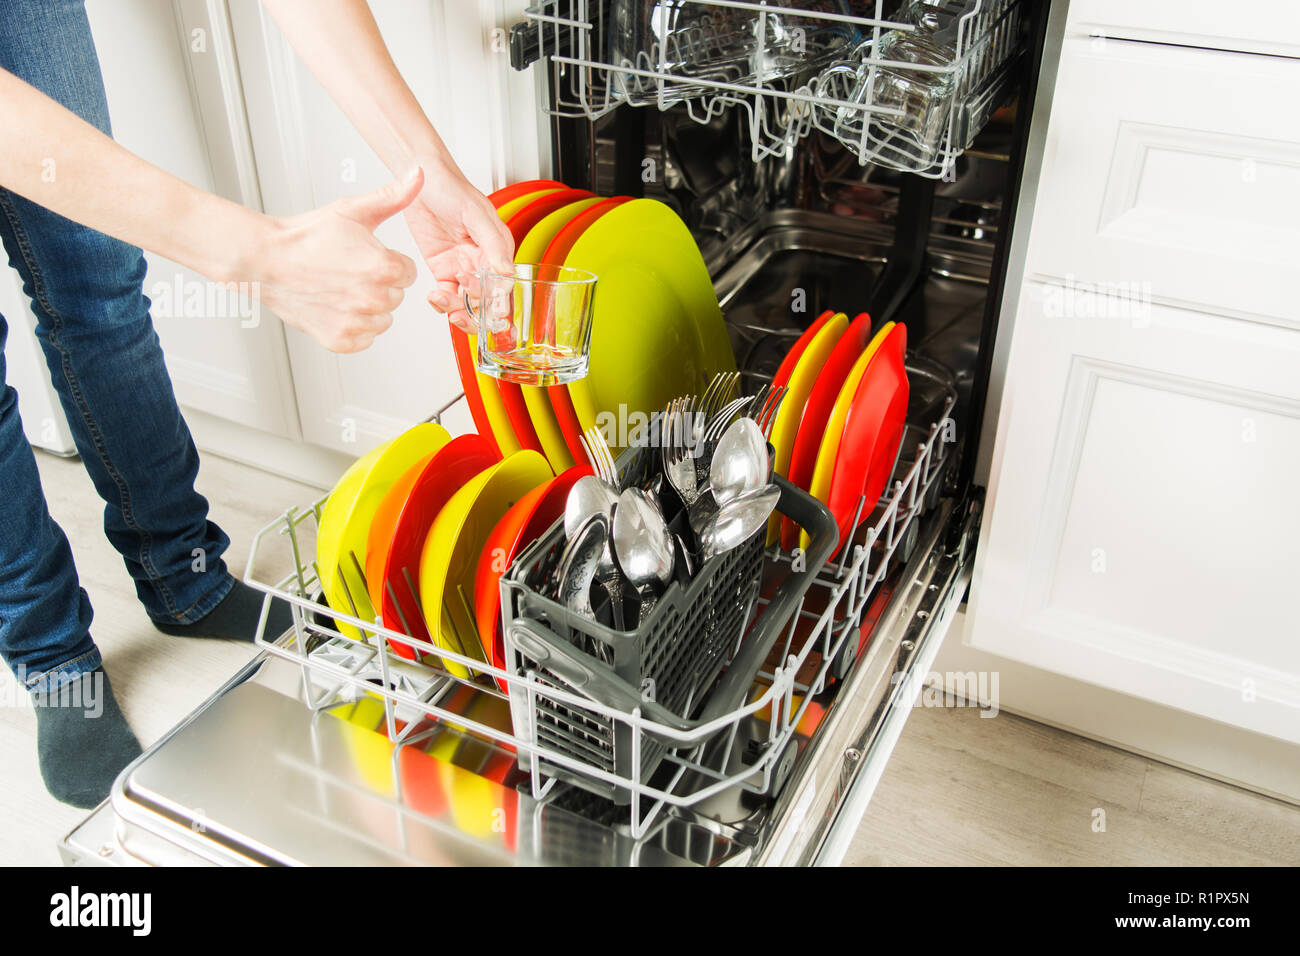 Female legs in jeans with hands showing thumbs up for clean plate after dishwasher, housework concept Stock Photo